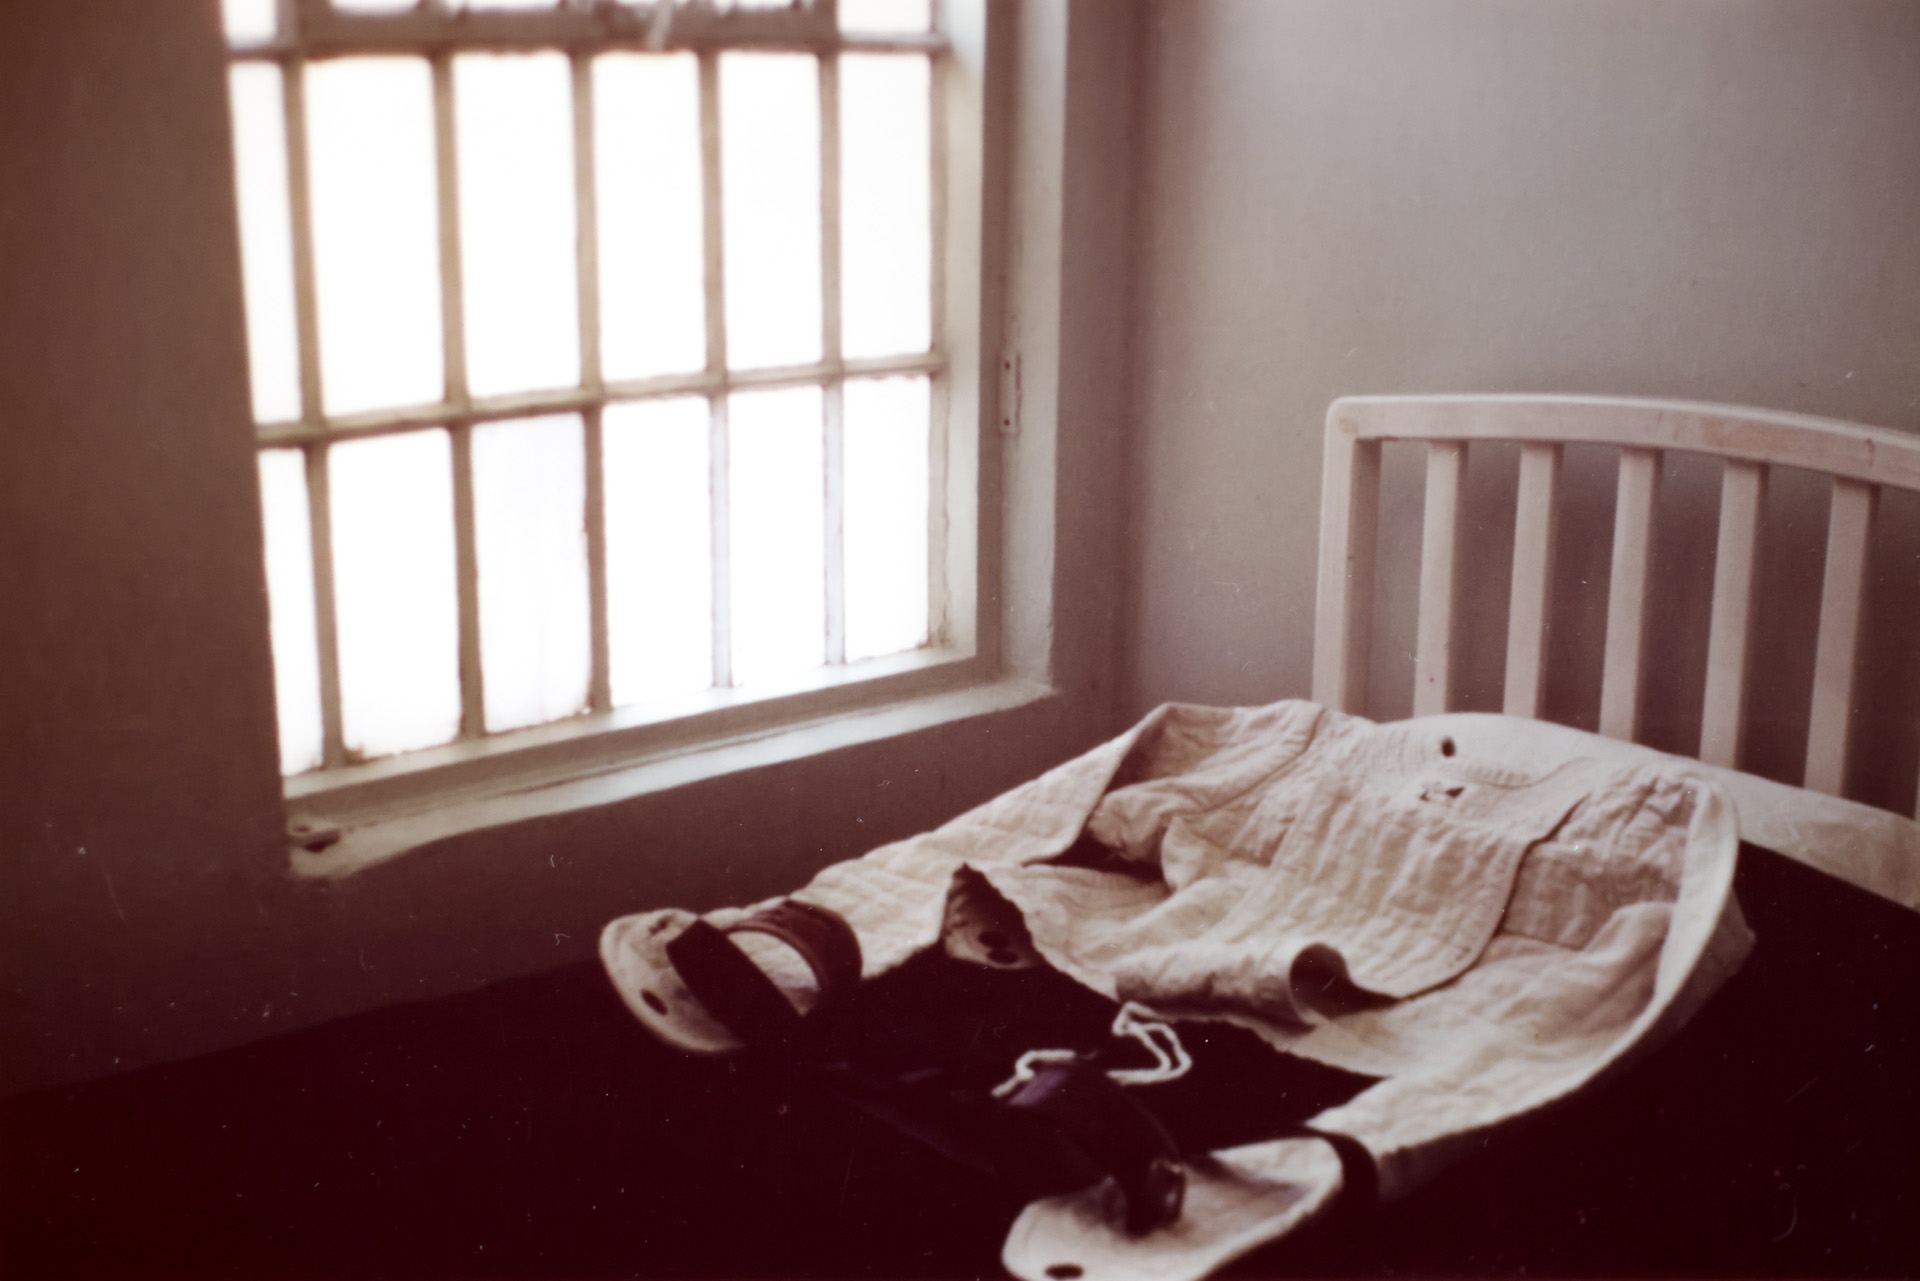 <p>A photo of what appears to be a straitjacket lying on a bed by a window. The image was found in the files of Northern State Hospital at the Washington State Archives in Olympia. (Washington State Archives)</p>
